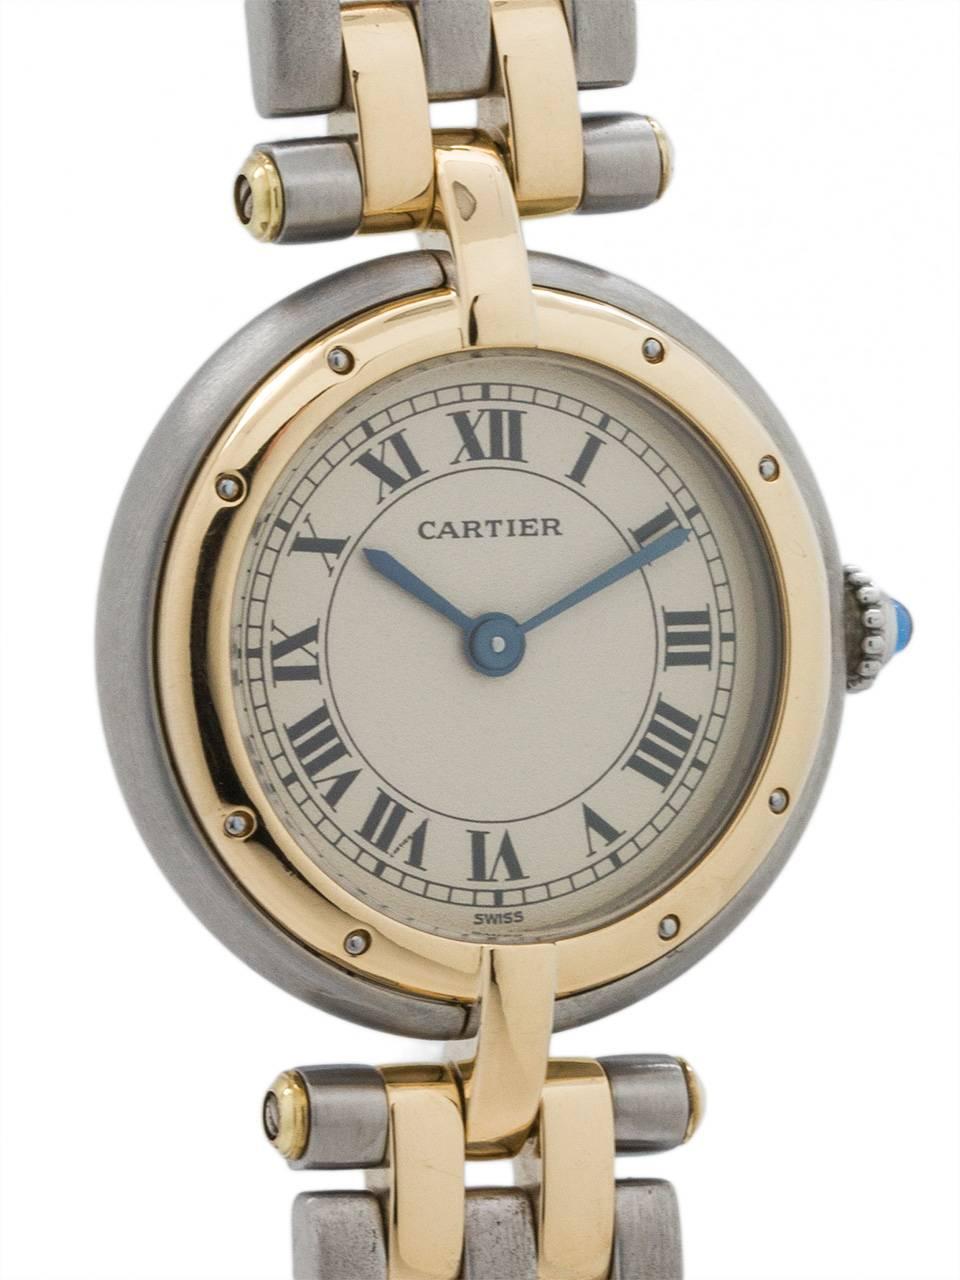 
Cartier lady’s Vendome Panther SS/18K YG circa 2000’s. Featuring 23mm diameter case with gold bezel and t-bar lug, steel case body, sapphire crystal, Cartier blue cabochon crown, and with Panther bracelet with 3 stainless steel and 2 18K YG rows of